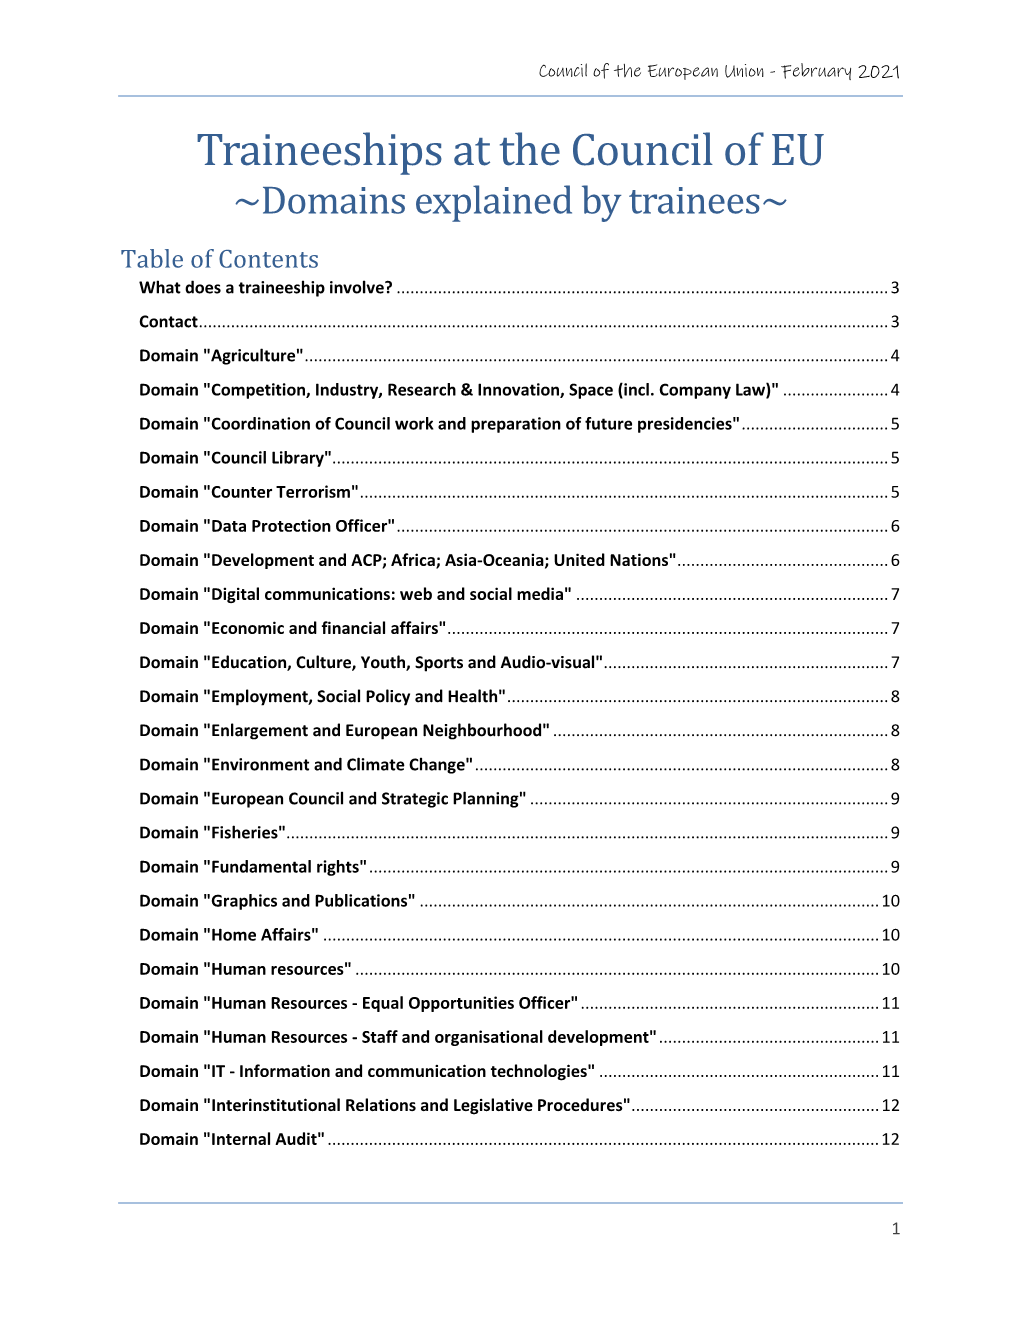 Traineeships at the Council of EU ~Domains Explained by Trainees~ Table of Contents What Does a Traineeship Involve?